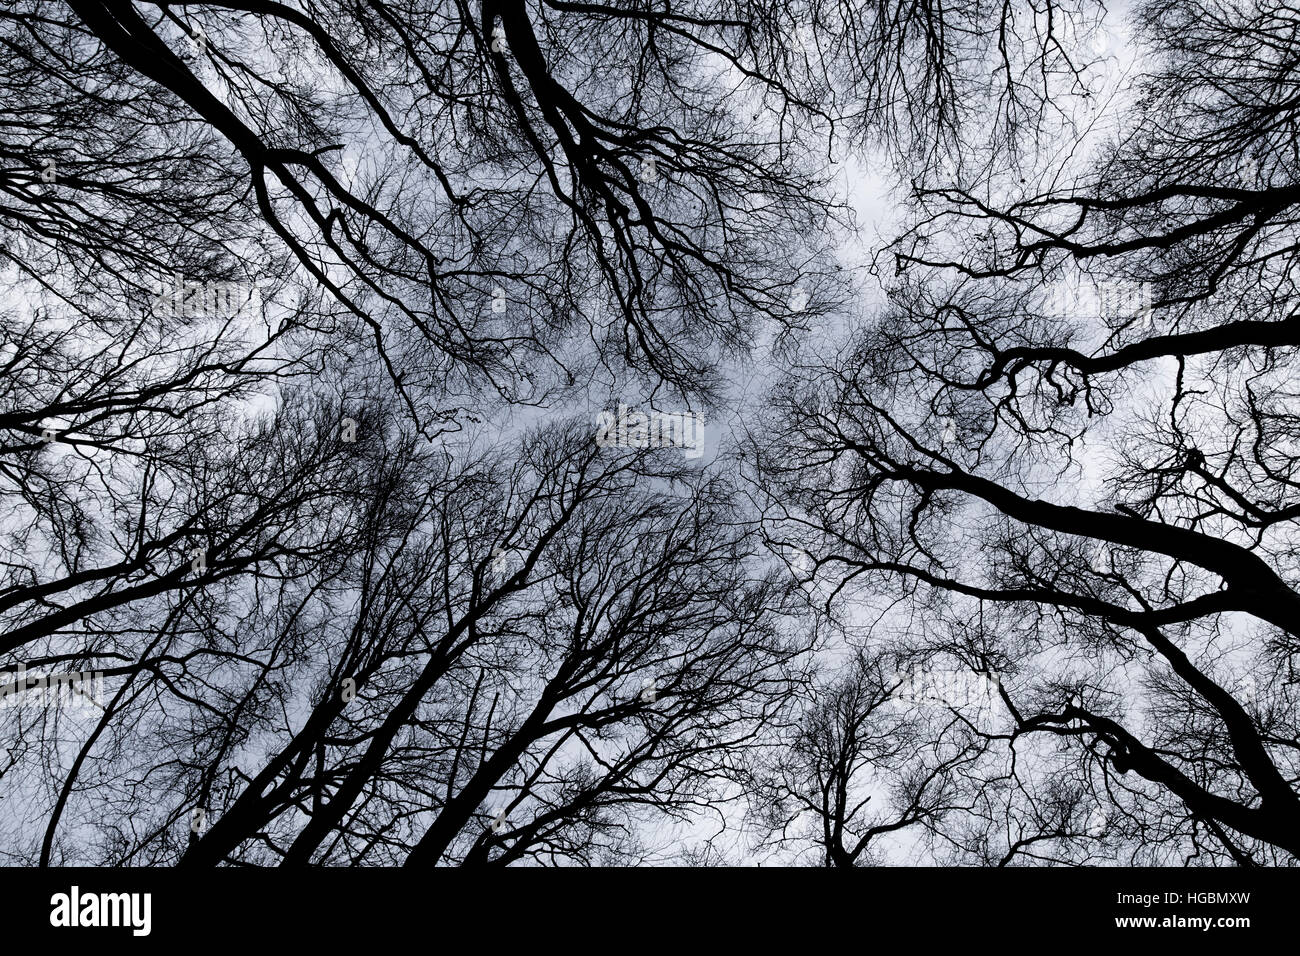 Tree tops, beech forest, without leaves in winter, Stock Photo